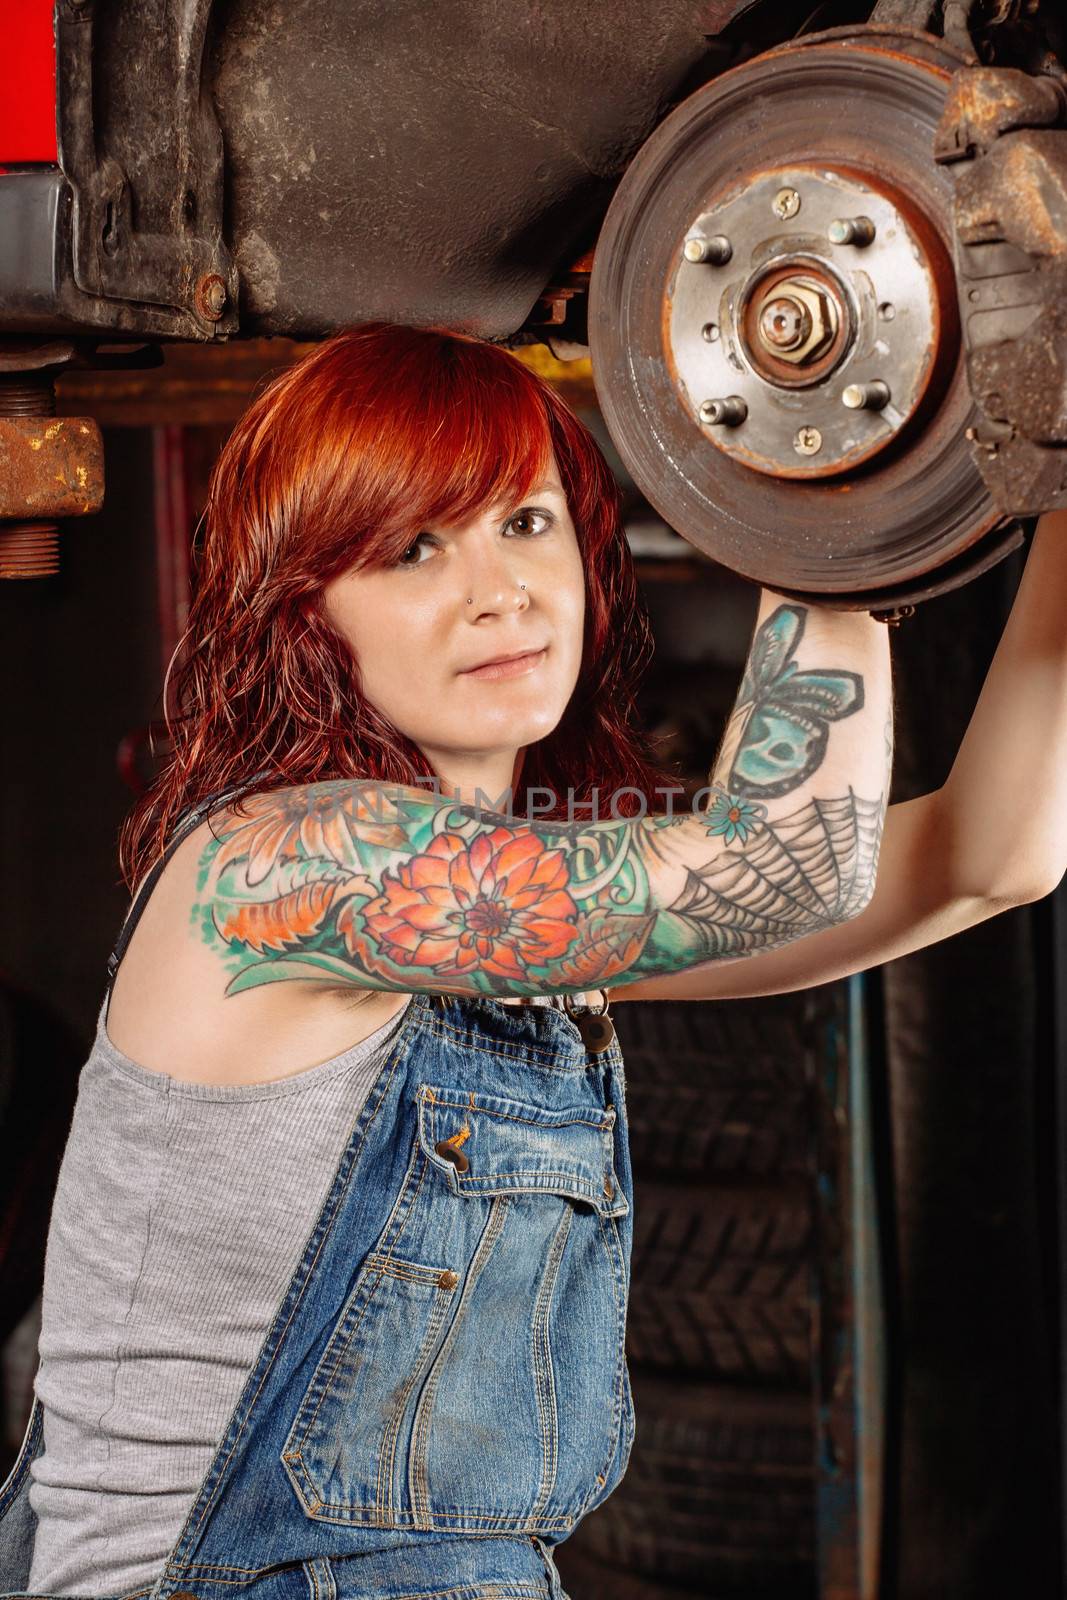 Photo of a young beautiful redhead mechanic wearing overalls and working on a car up on a hoist. Attached property release is for arm tattoos.
